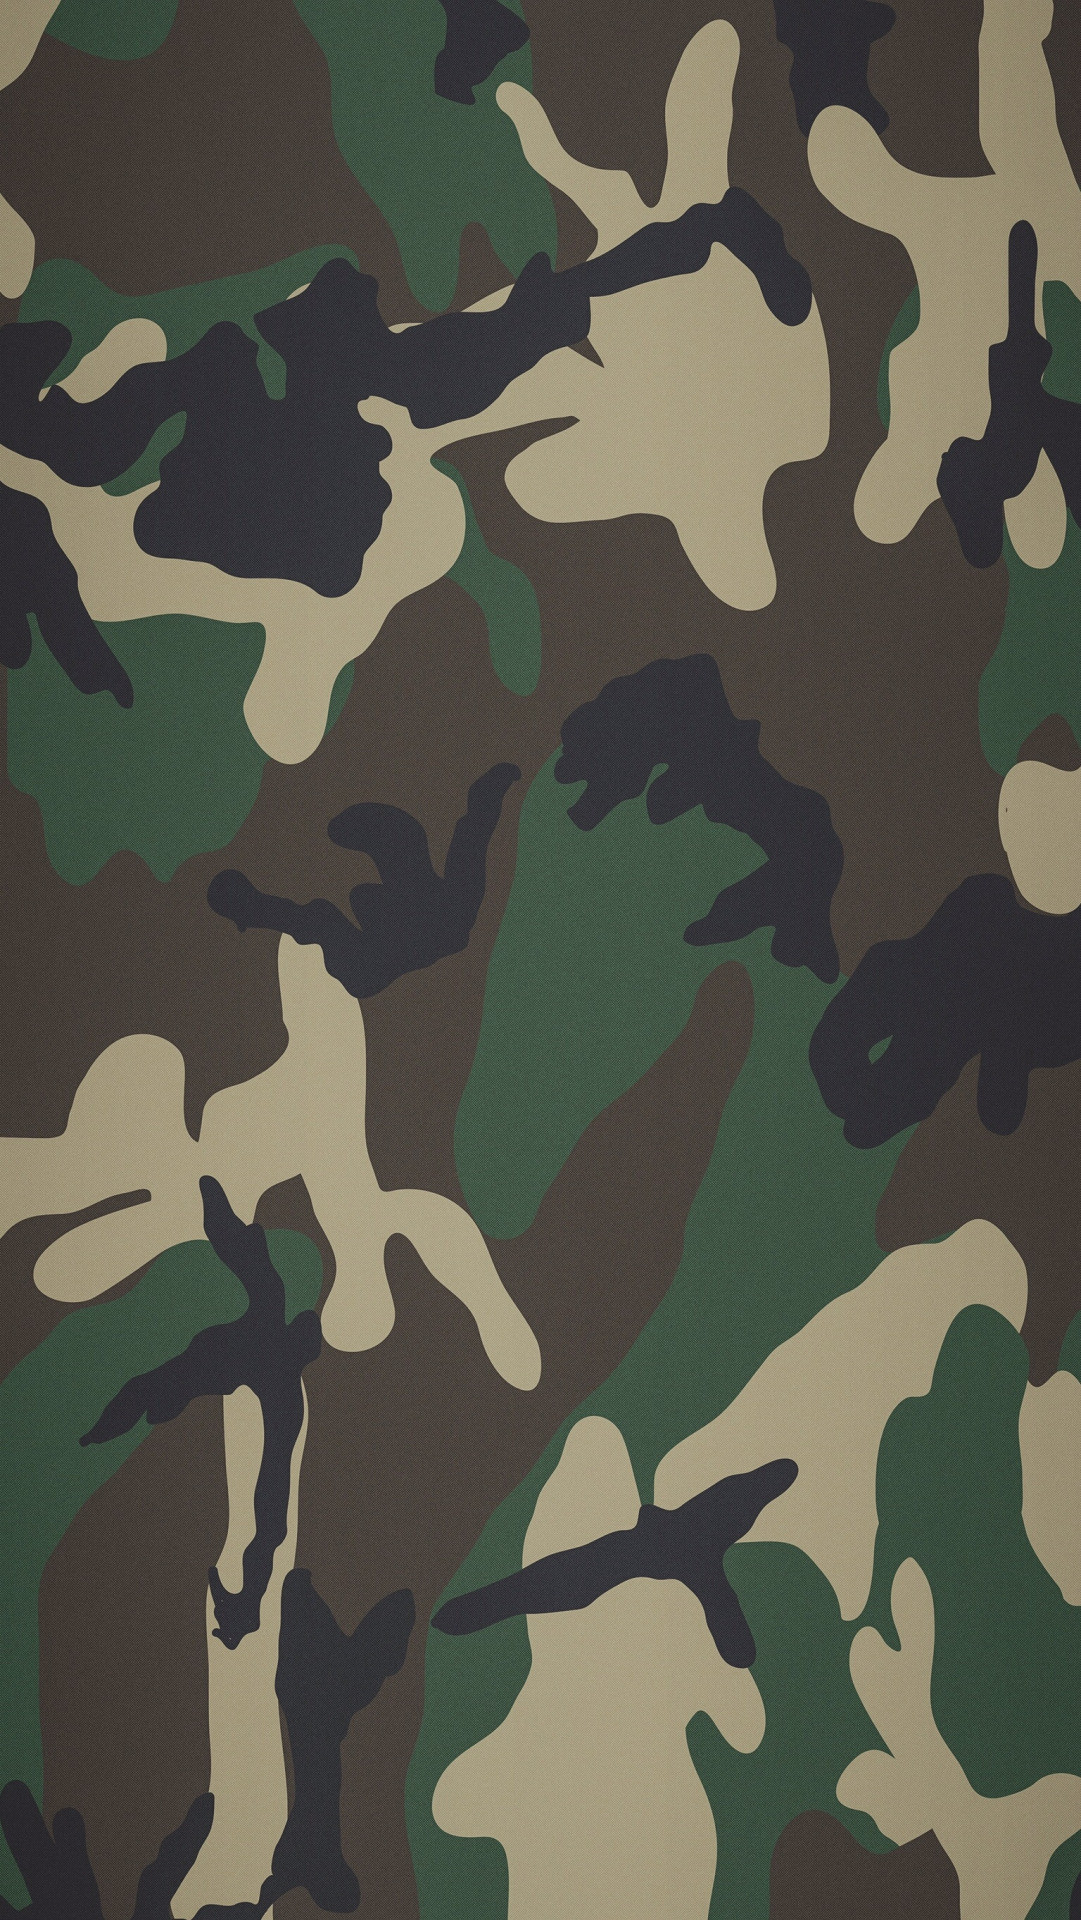 Camo Wallpapers Android Apps on Google Play | HD Wallpapers | Pinterest | Camouflage  wallpaper, Wallpaper and Wallpapers android